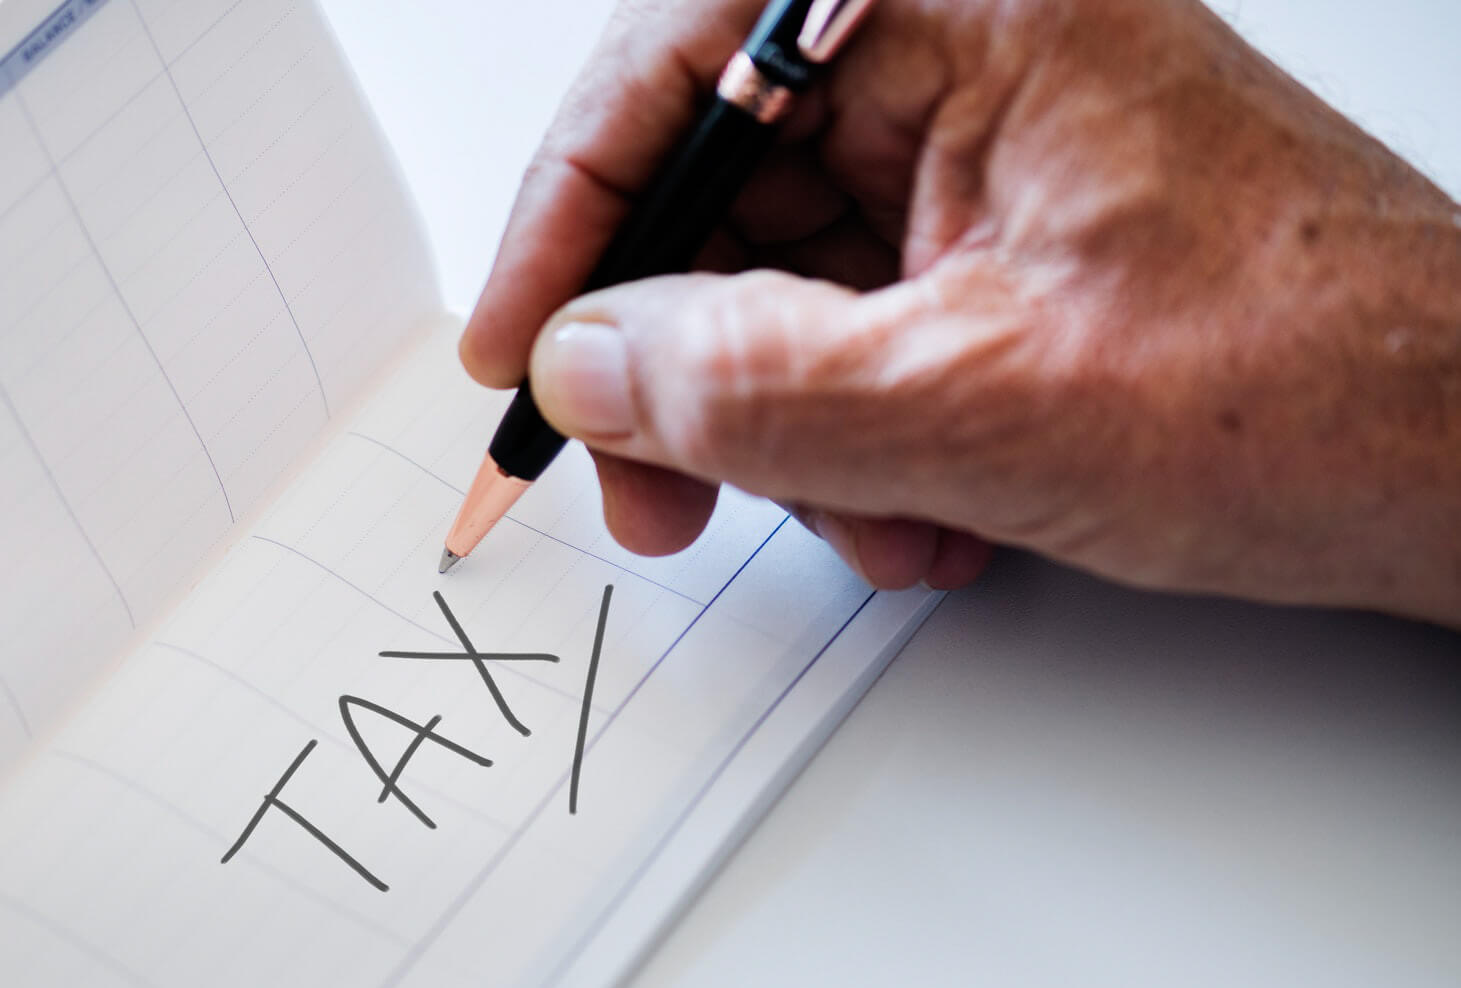 Should inheritance tax be scrapped or reformed?